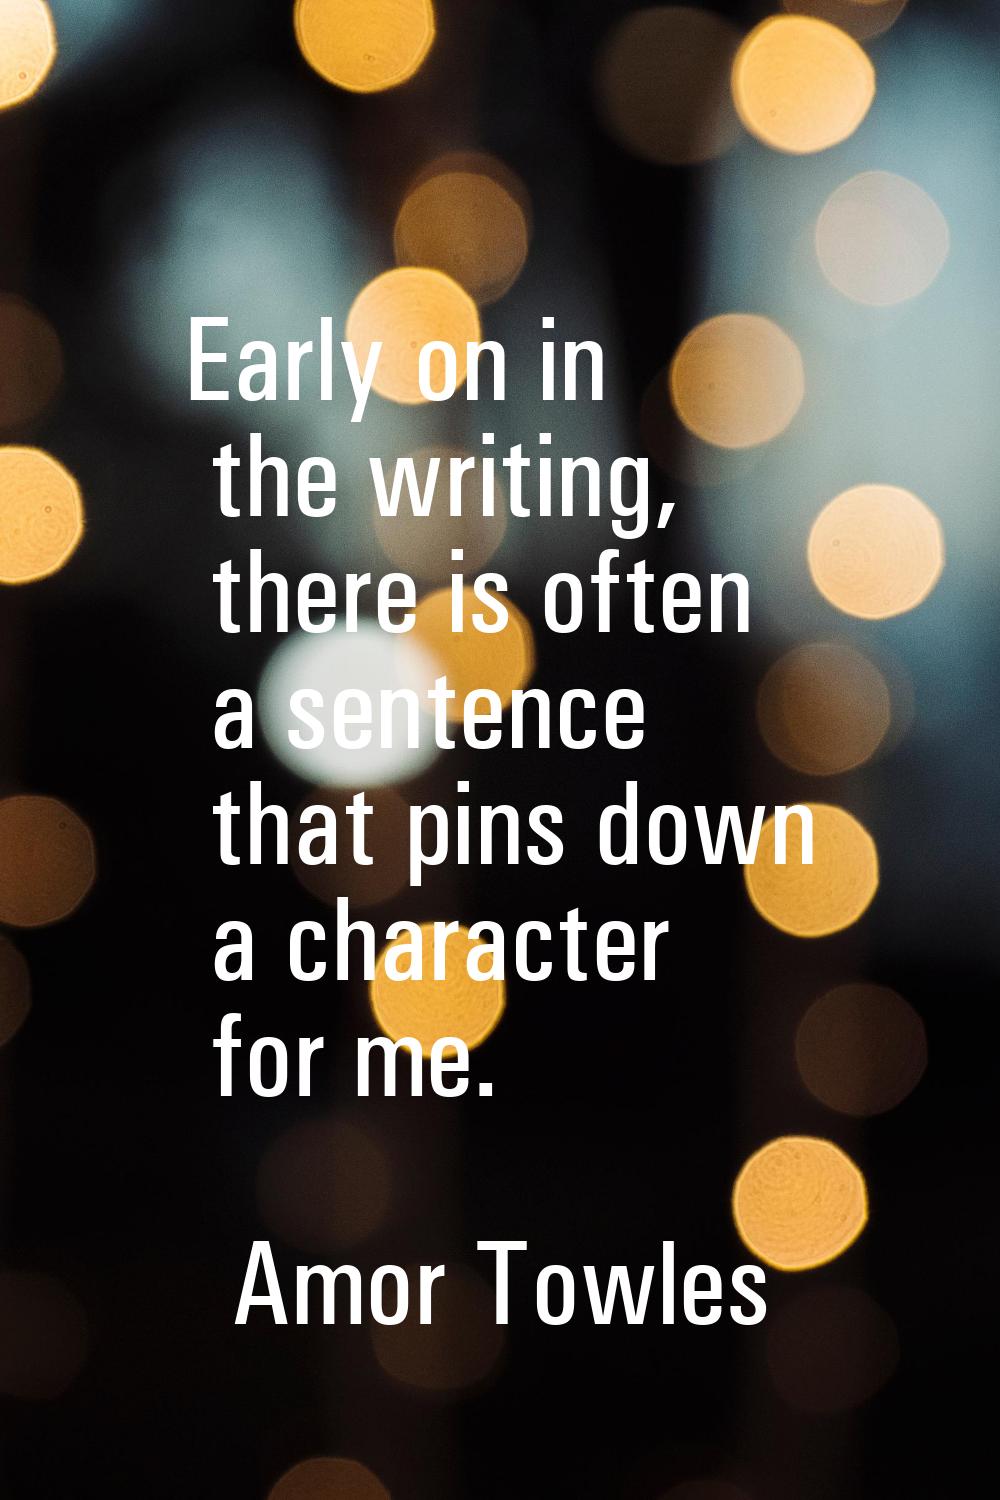 Early on in the writing, there is often a sentence that pins down a character for me.